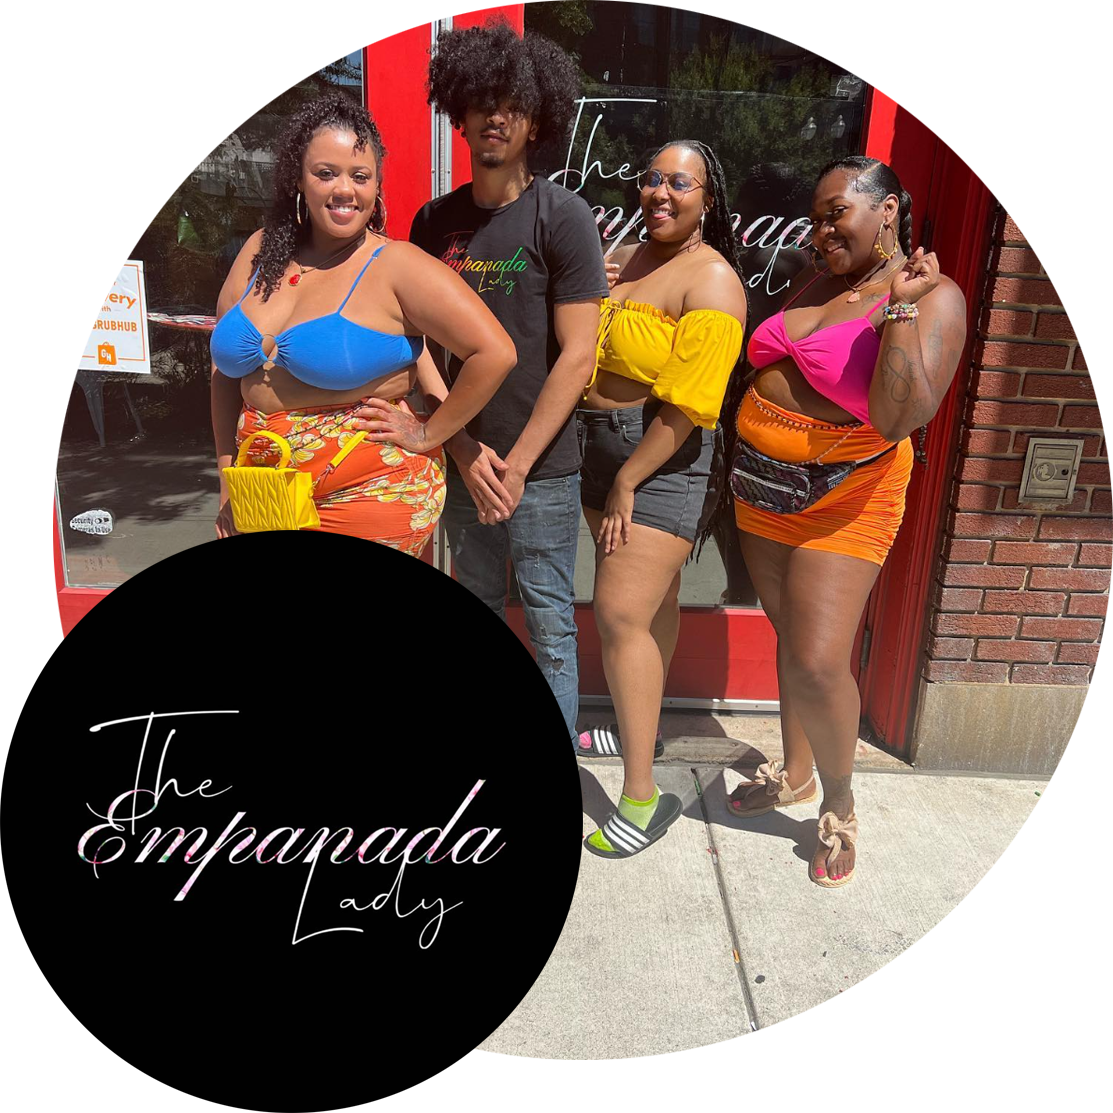 The logo & a promotional image from The Empanada Lady, home of the best Afro-Latinx fusion cuisine and experience in Baltimore, MD!